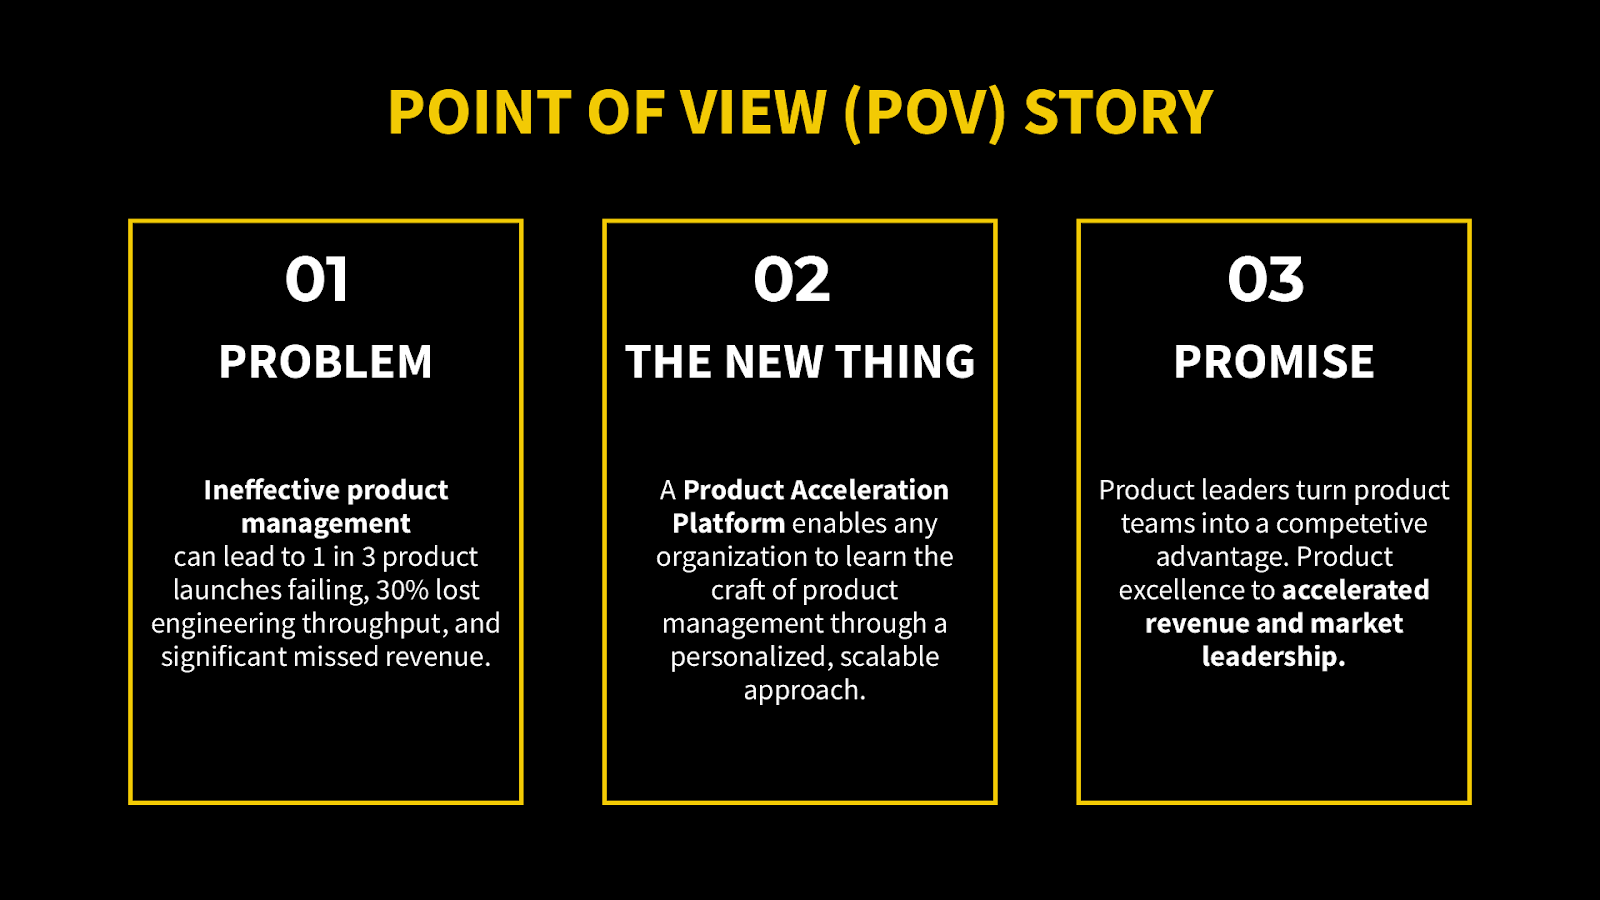 Examples for each of the three steps of a point of view (POV) story for the product strategy framework